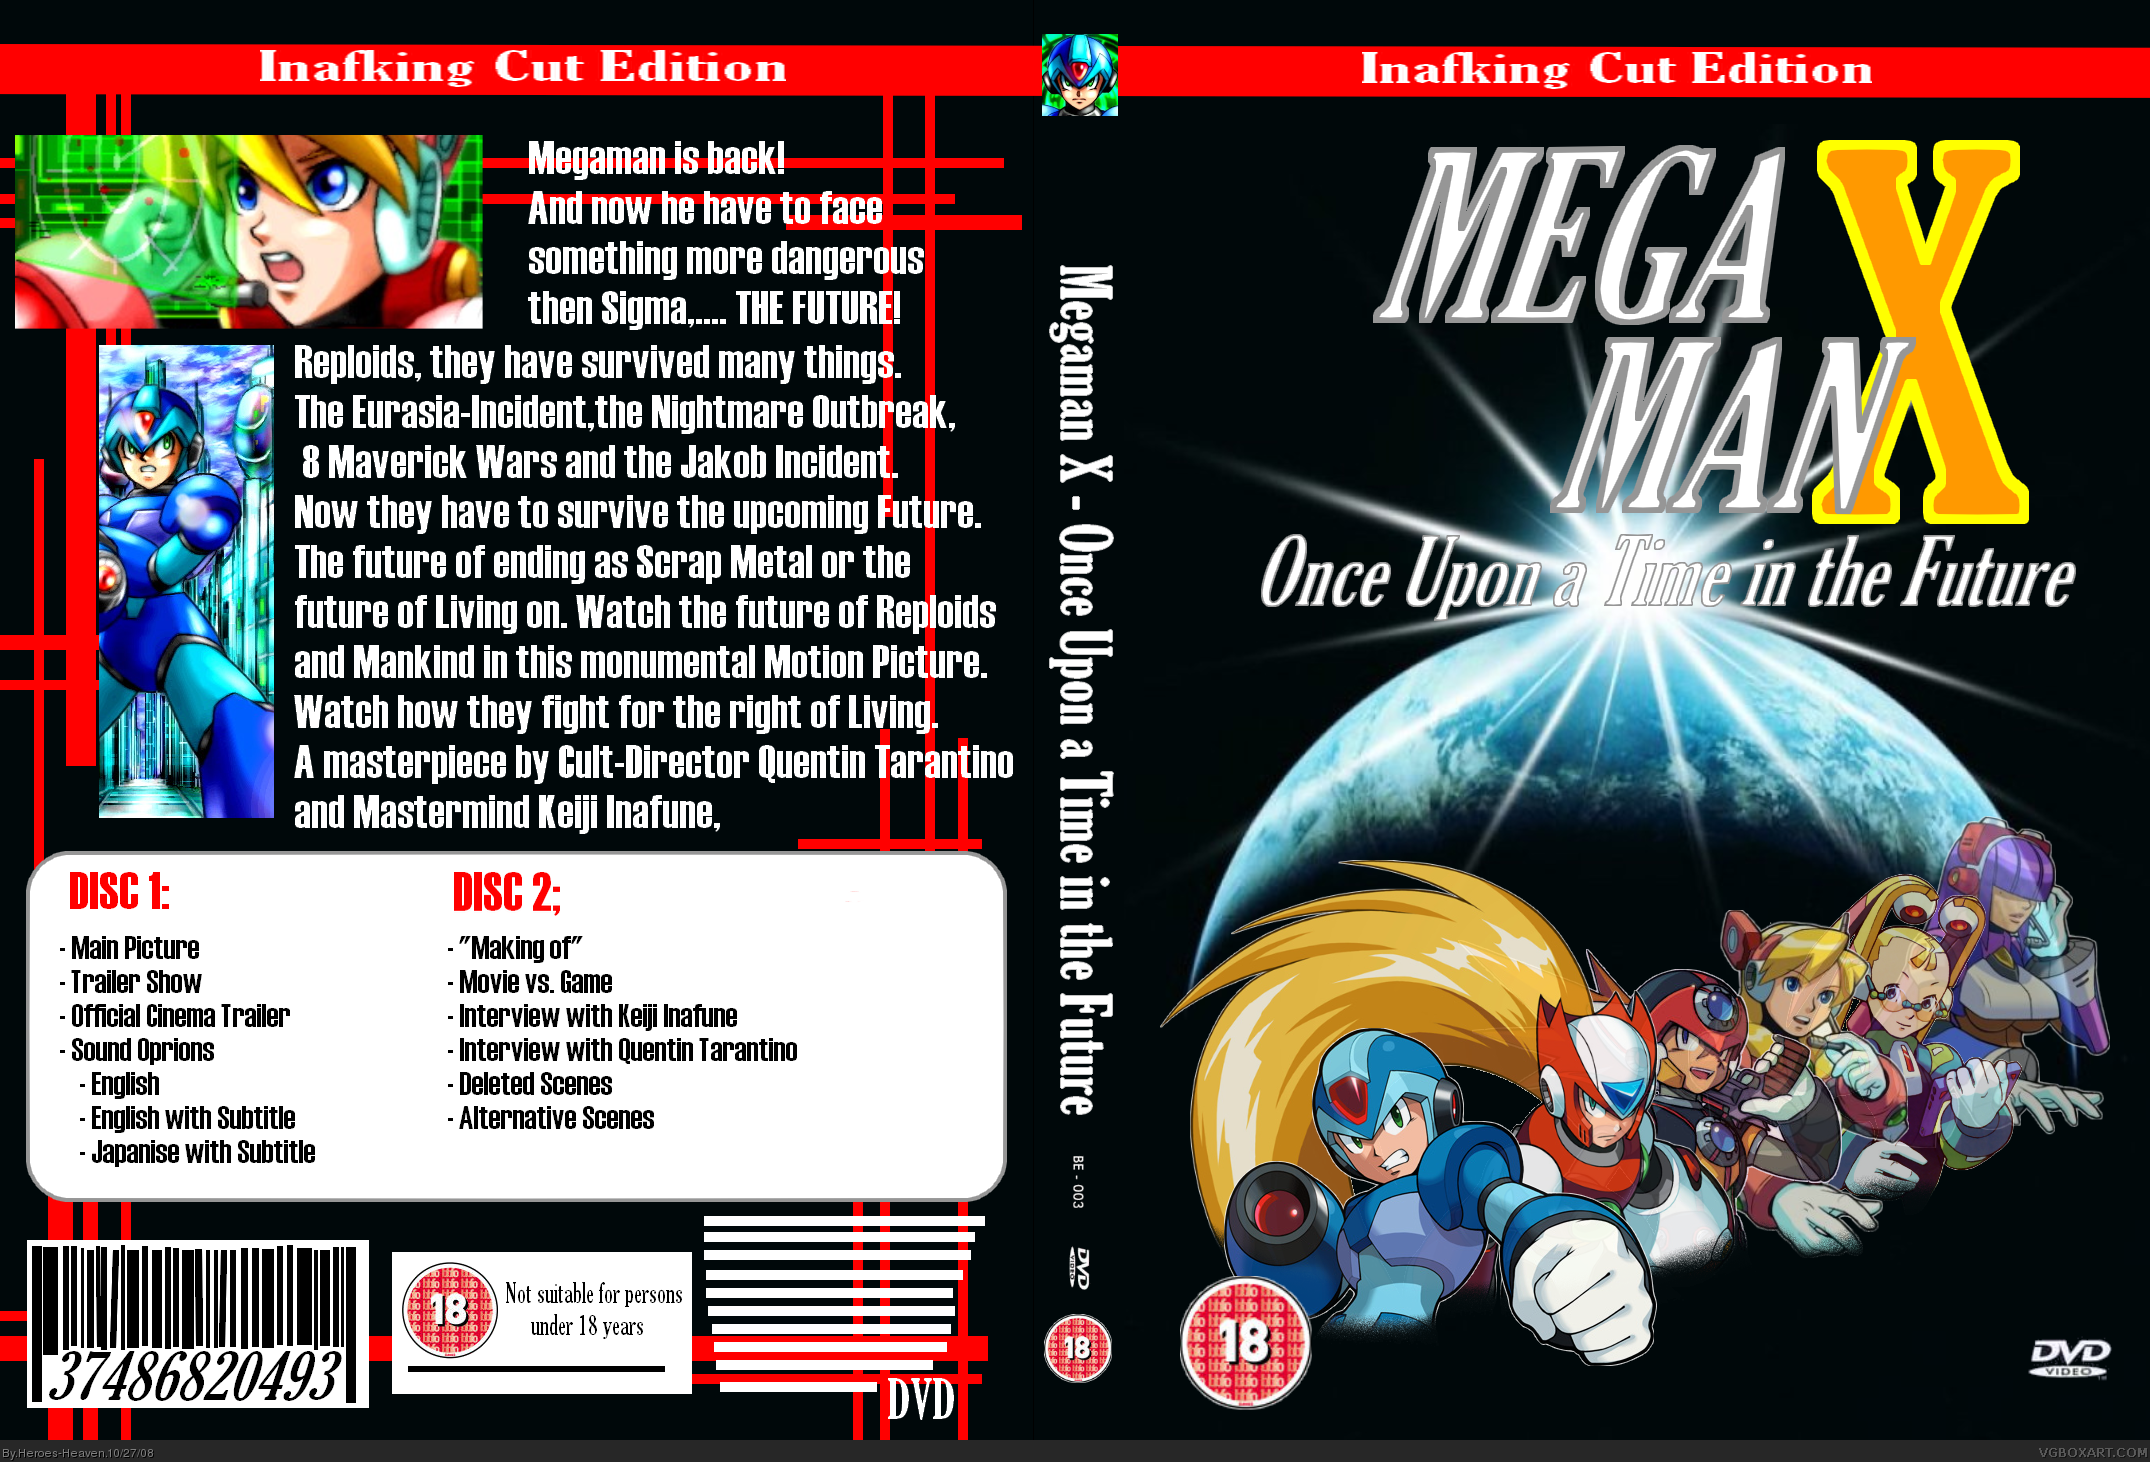 Megaman X - Once upon a time in the Future box cover